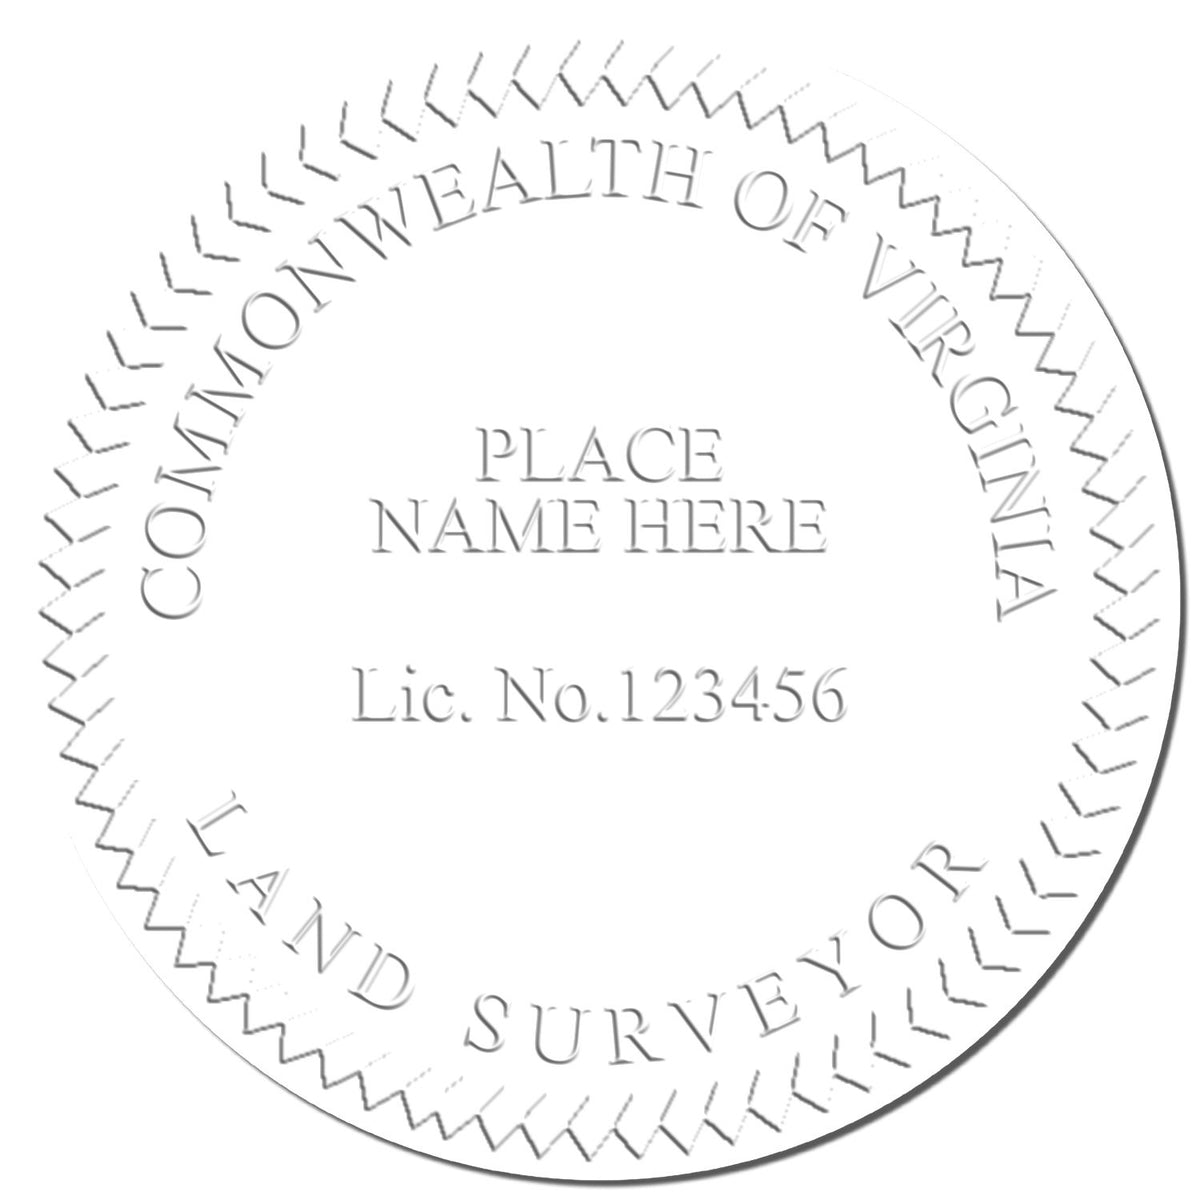 This paper is stamped with a sample imprint of the Gift Virginia Land Surveyor Seal, signifying its quality and reliability.